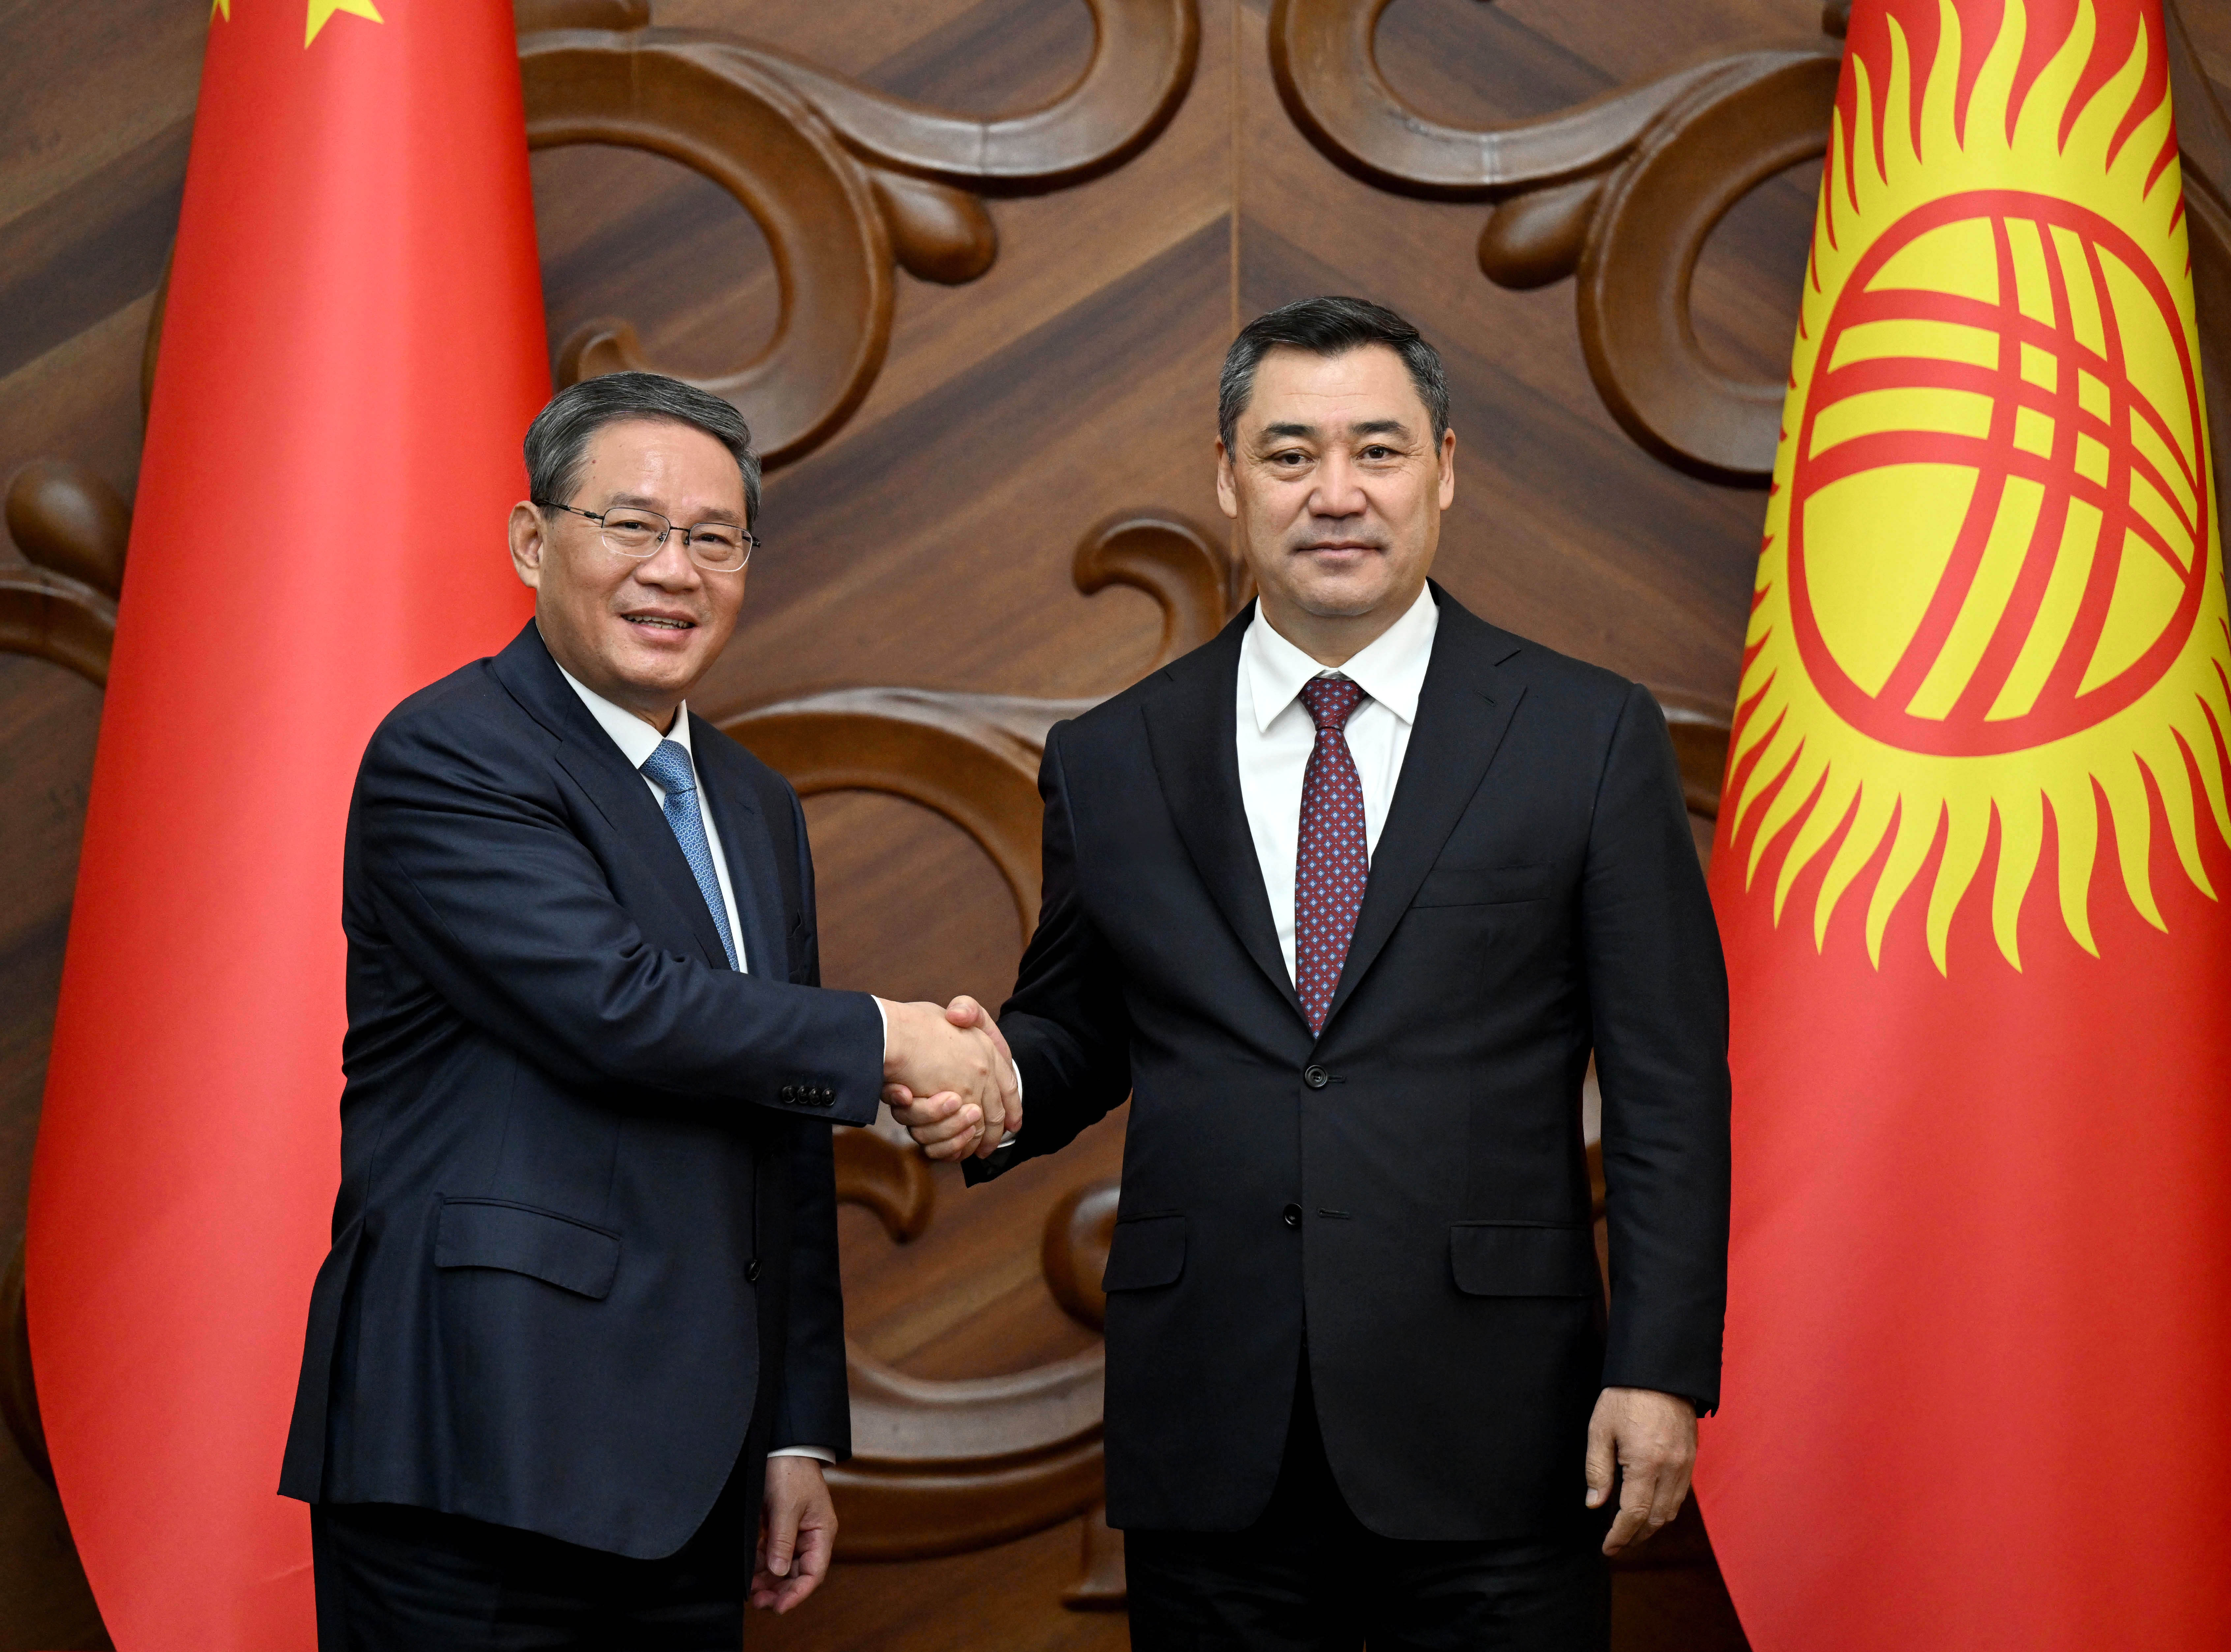 President of Kyrgyzstan and Chinese Premier meet to strengthen strategic partnership 